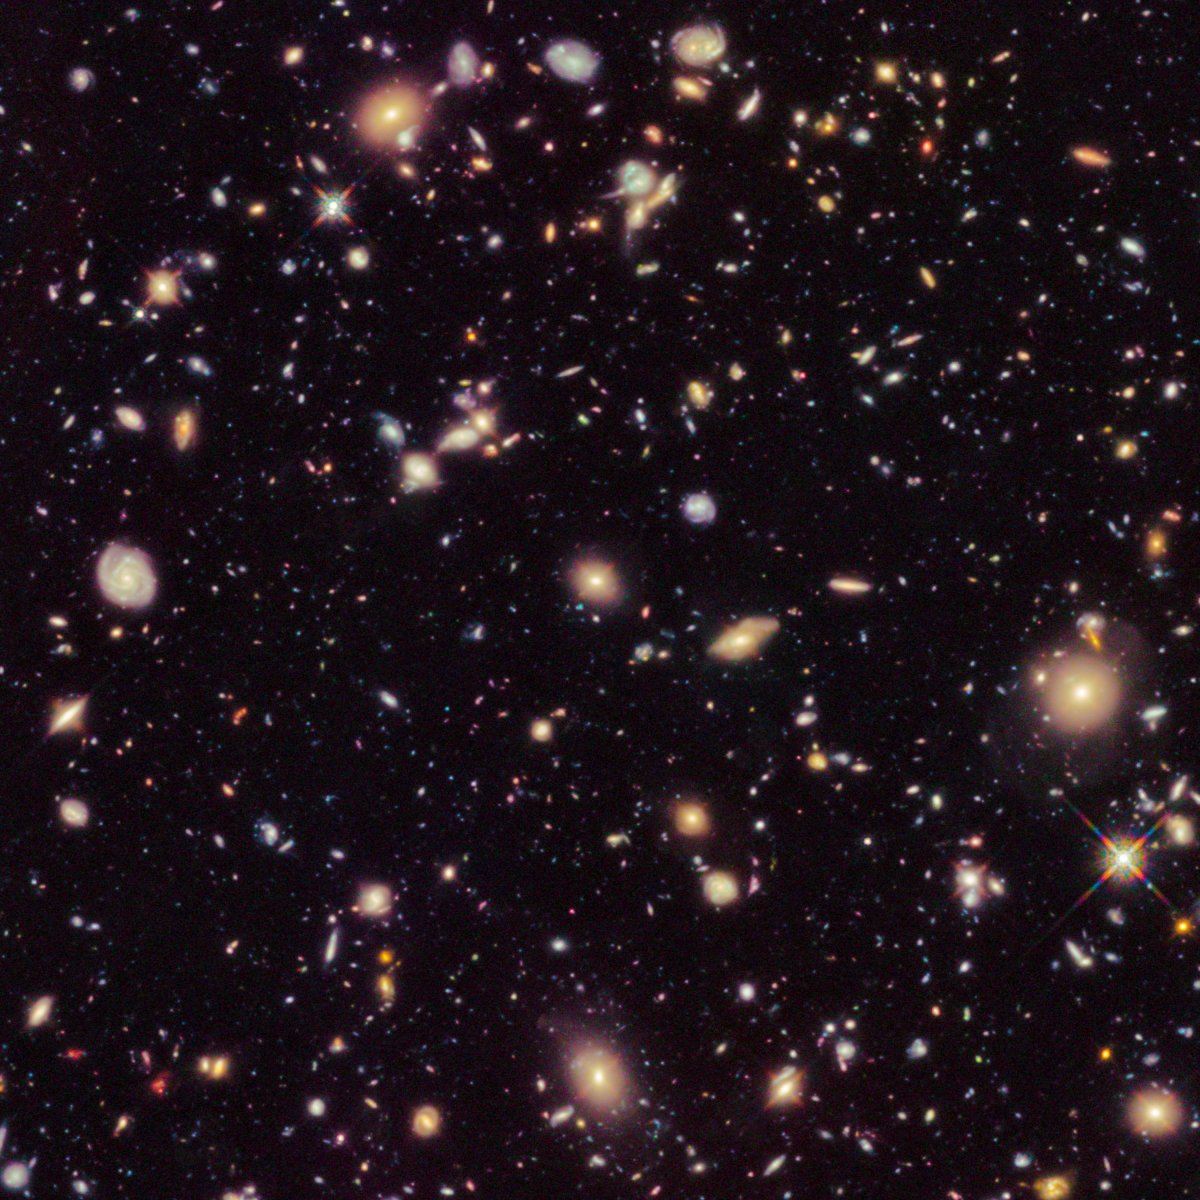 This image made available by the European Space agency shows galaxies in the Hubble Ultra Deep Field 2012, an improved version of the Hubble Ultra Deep Field image.